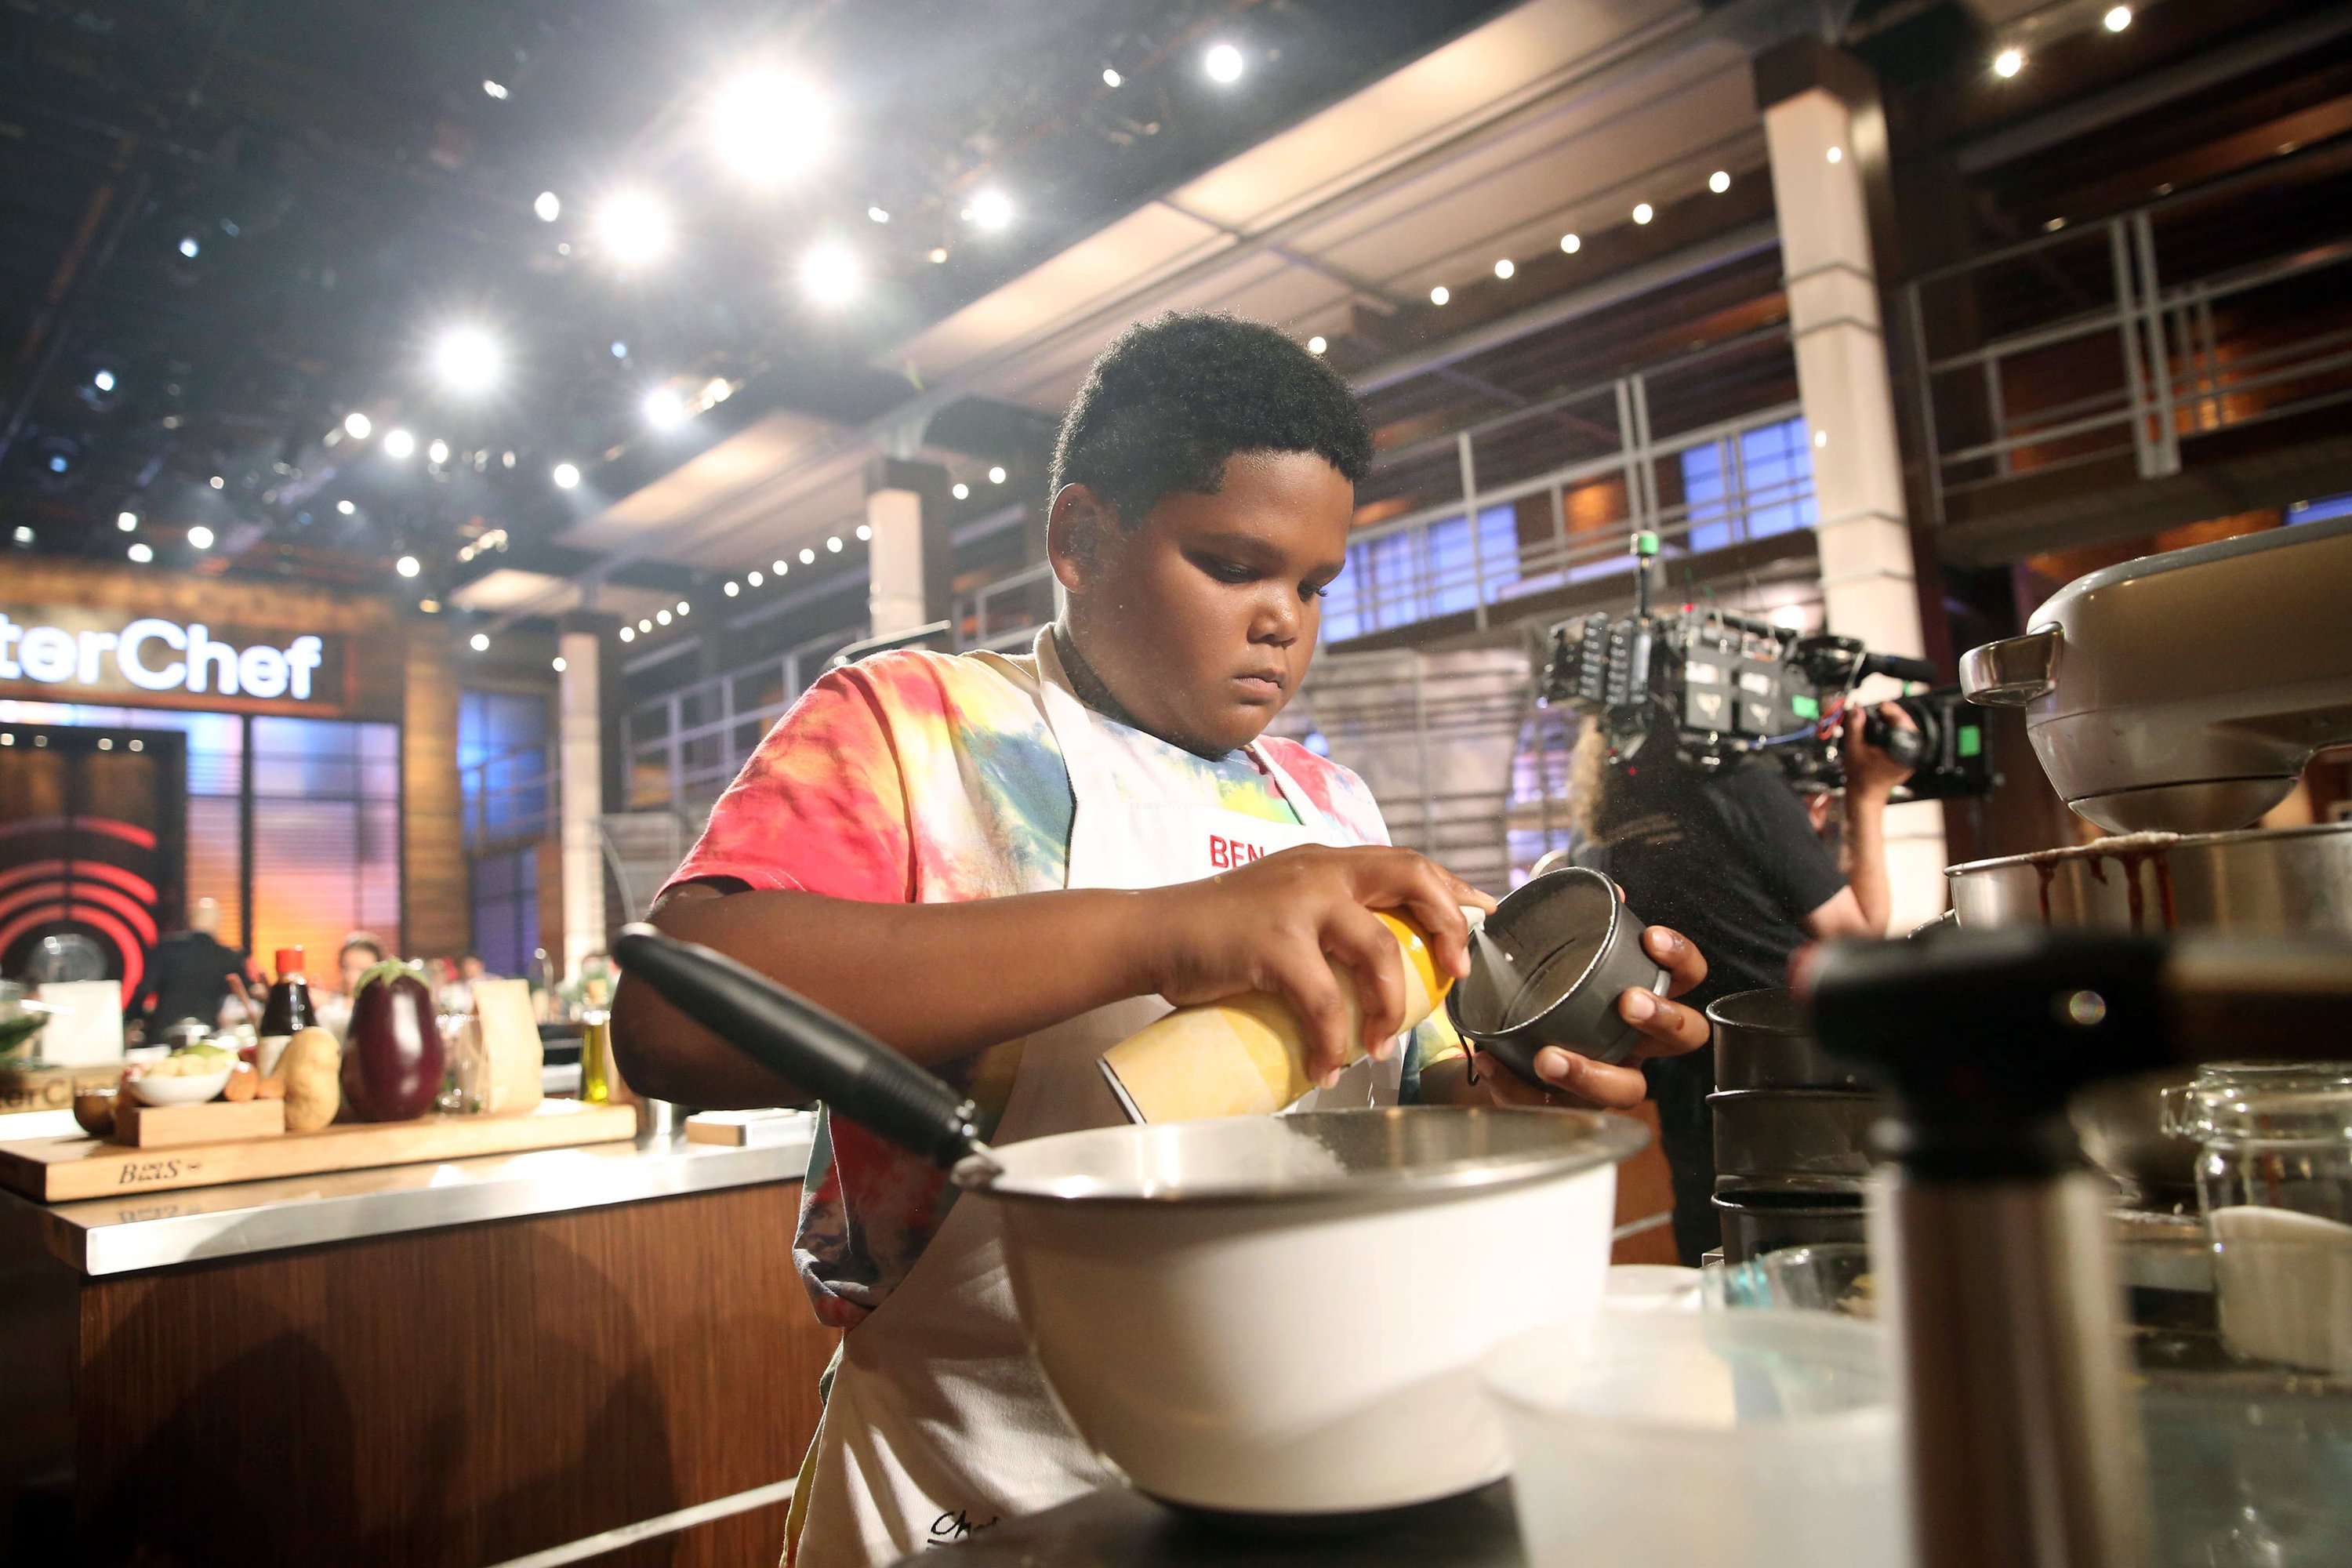 Ben Watkins pictured during the filming of "MasterChef Junior" in 2018. |Source: Getty Images